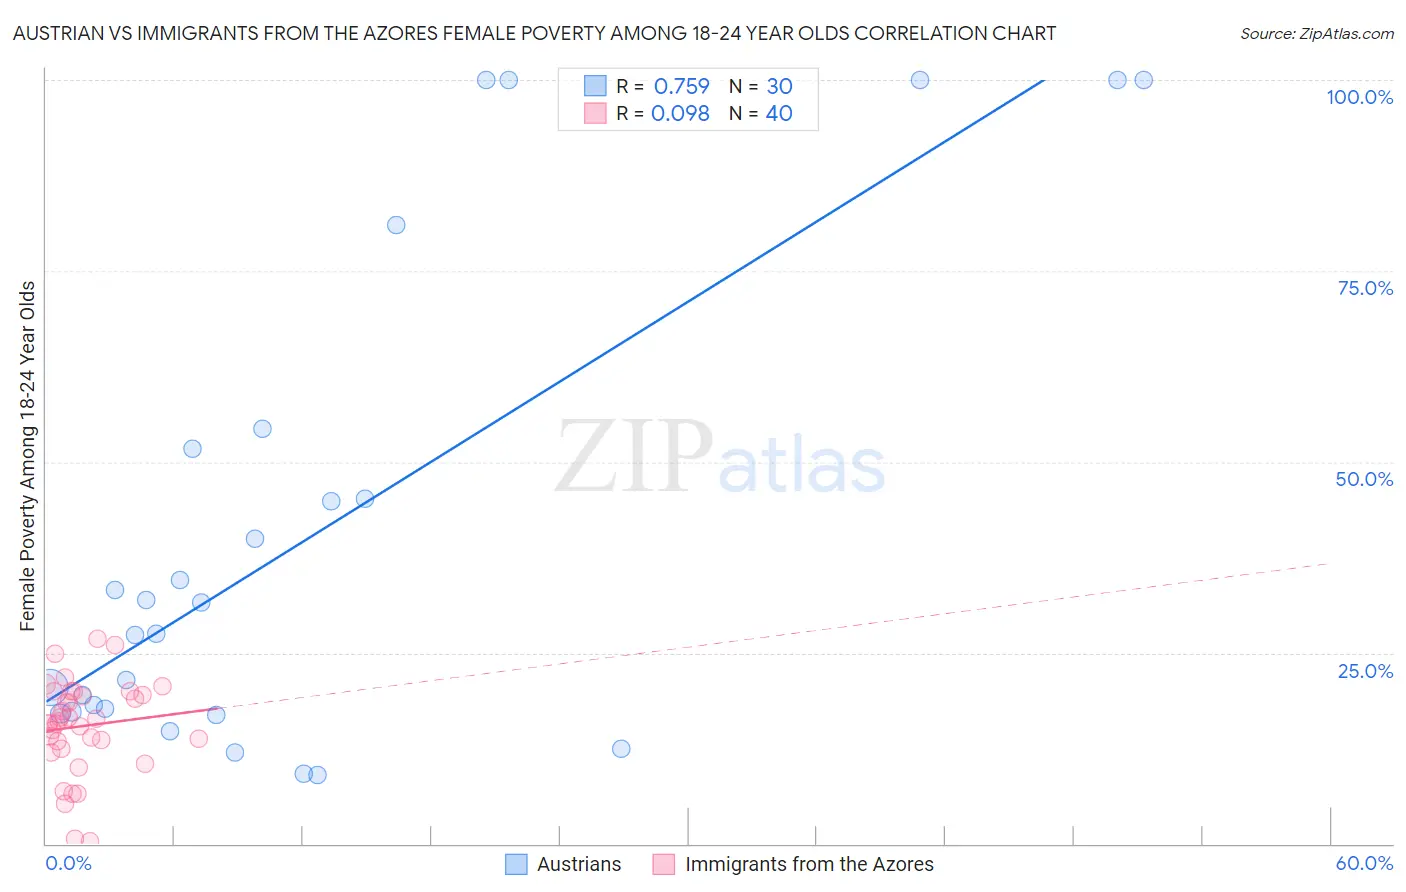 Austrian vs Immigrants from the Azores Female Poverty Among 18-24 Year Olds